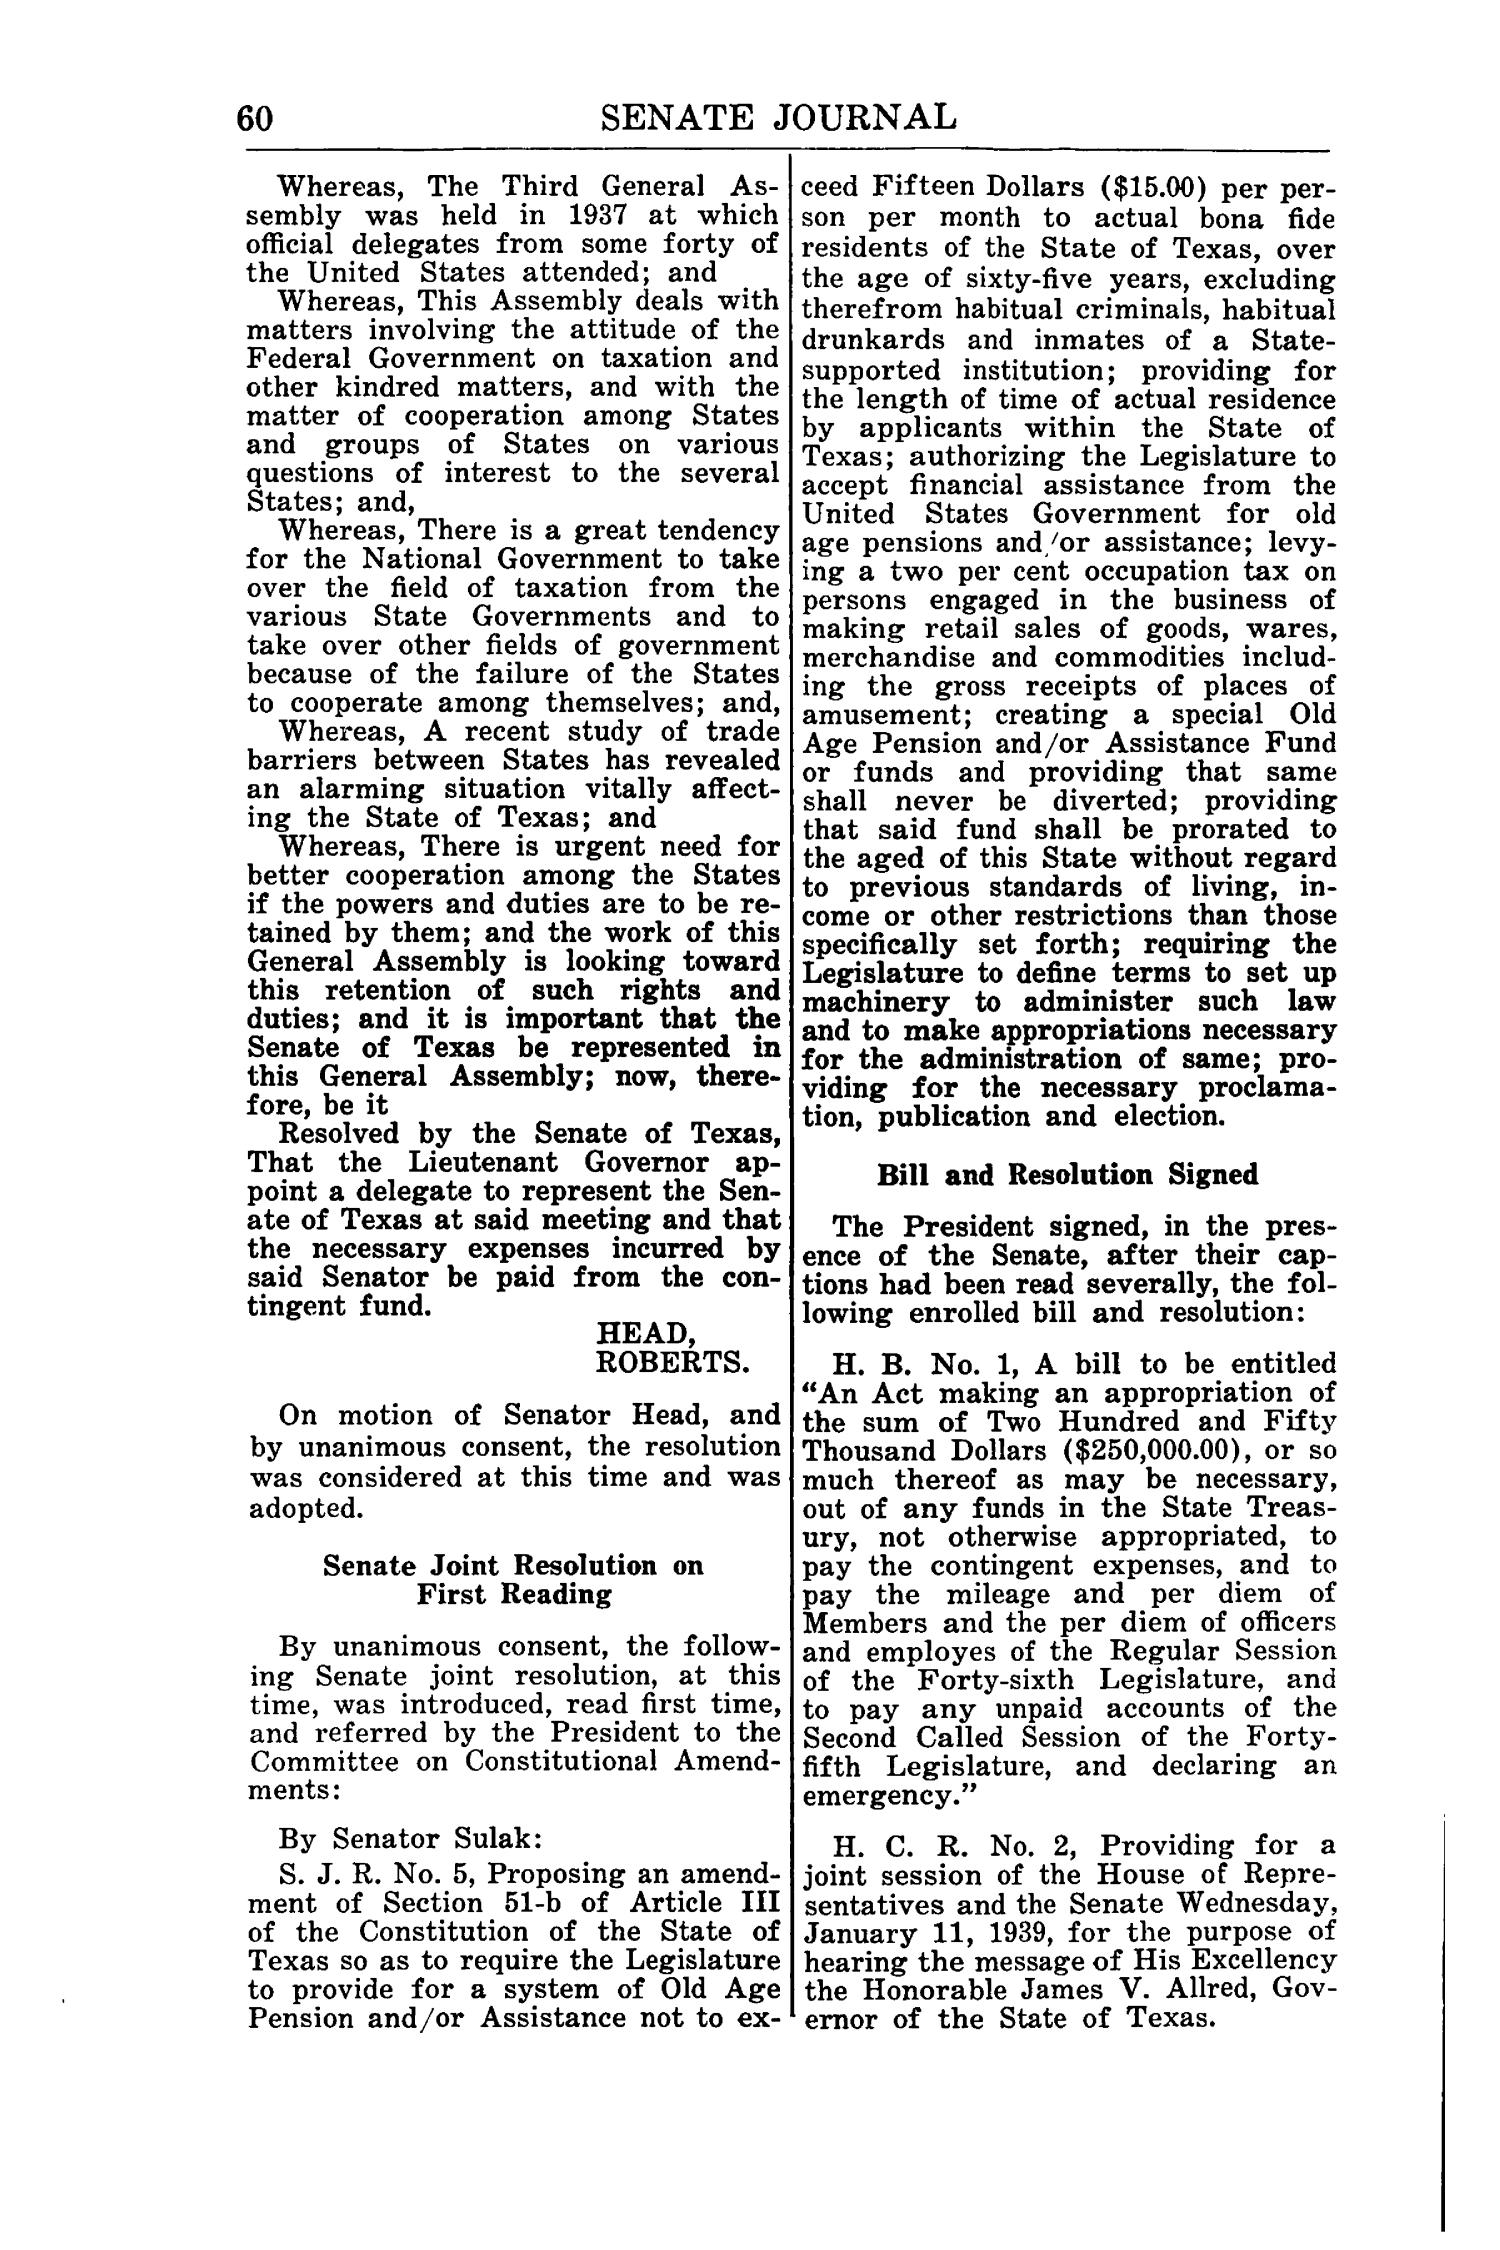 Journal of the Senate of the State of Texas, Regular Session of the Forty-Sixth Legislature
                                                
                                                    60
                                                